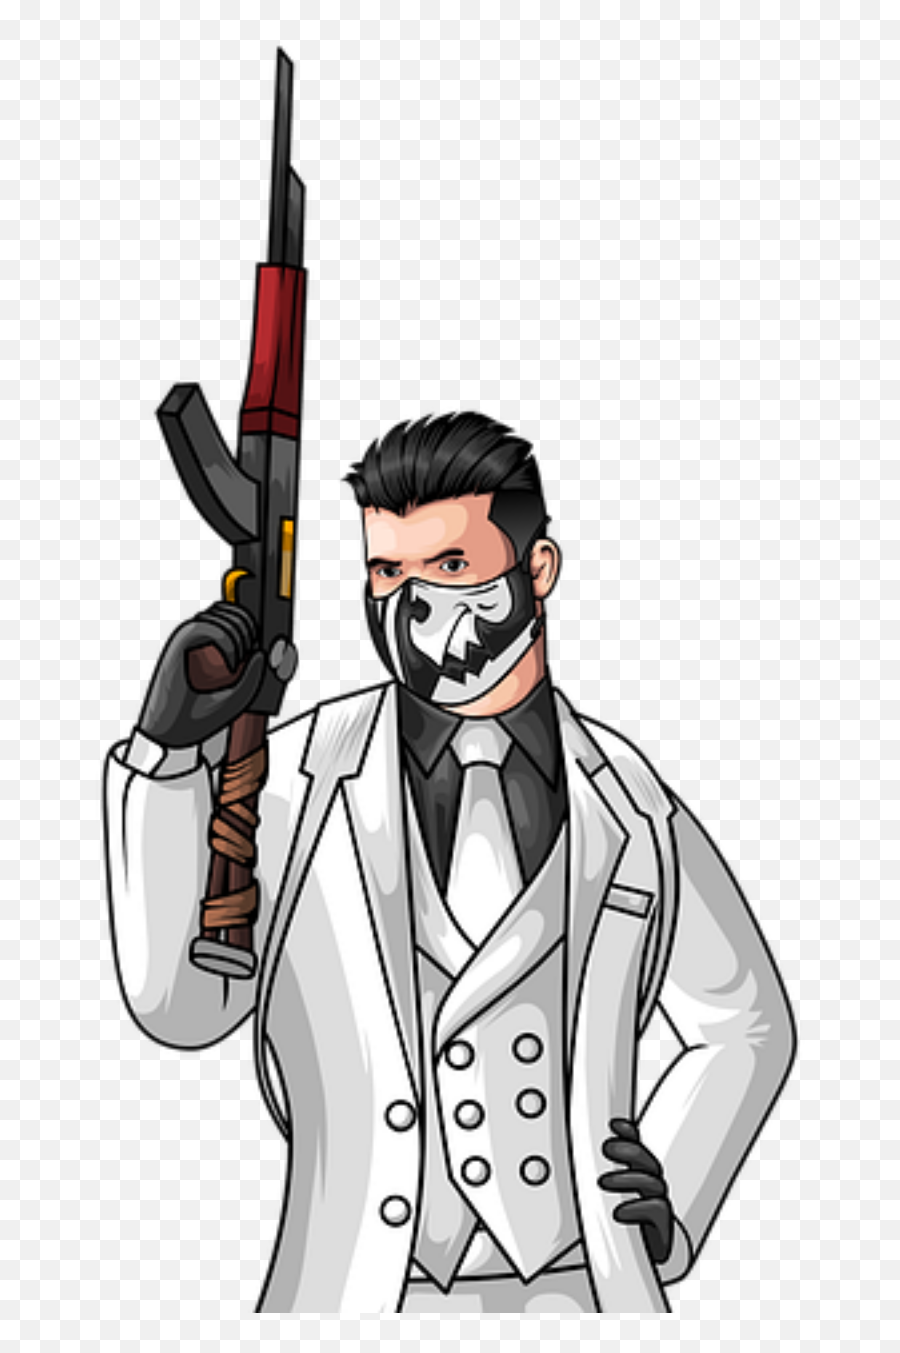 25 Pubg Mobile Logo Ideas - Pubg Carlo Character Png Emoji,How To Make Emoji On Pubg With Cotroller